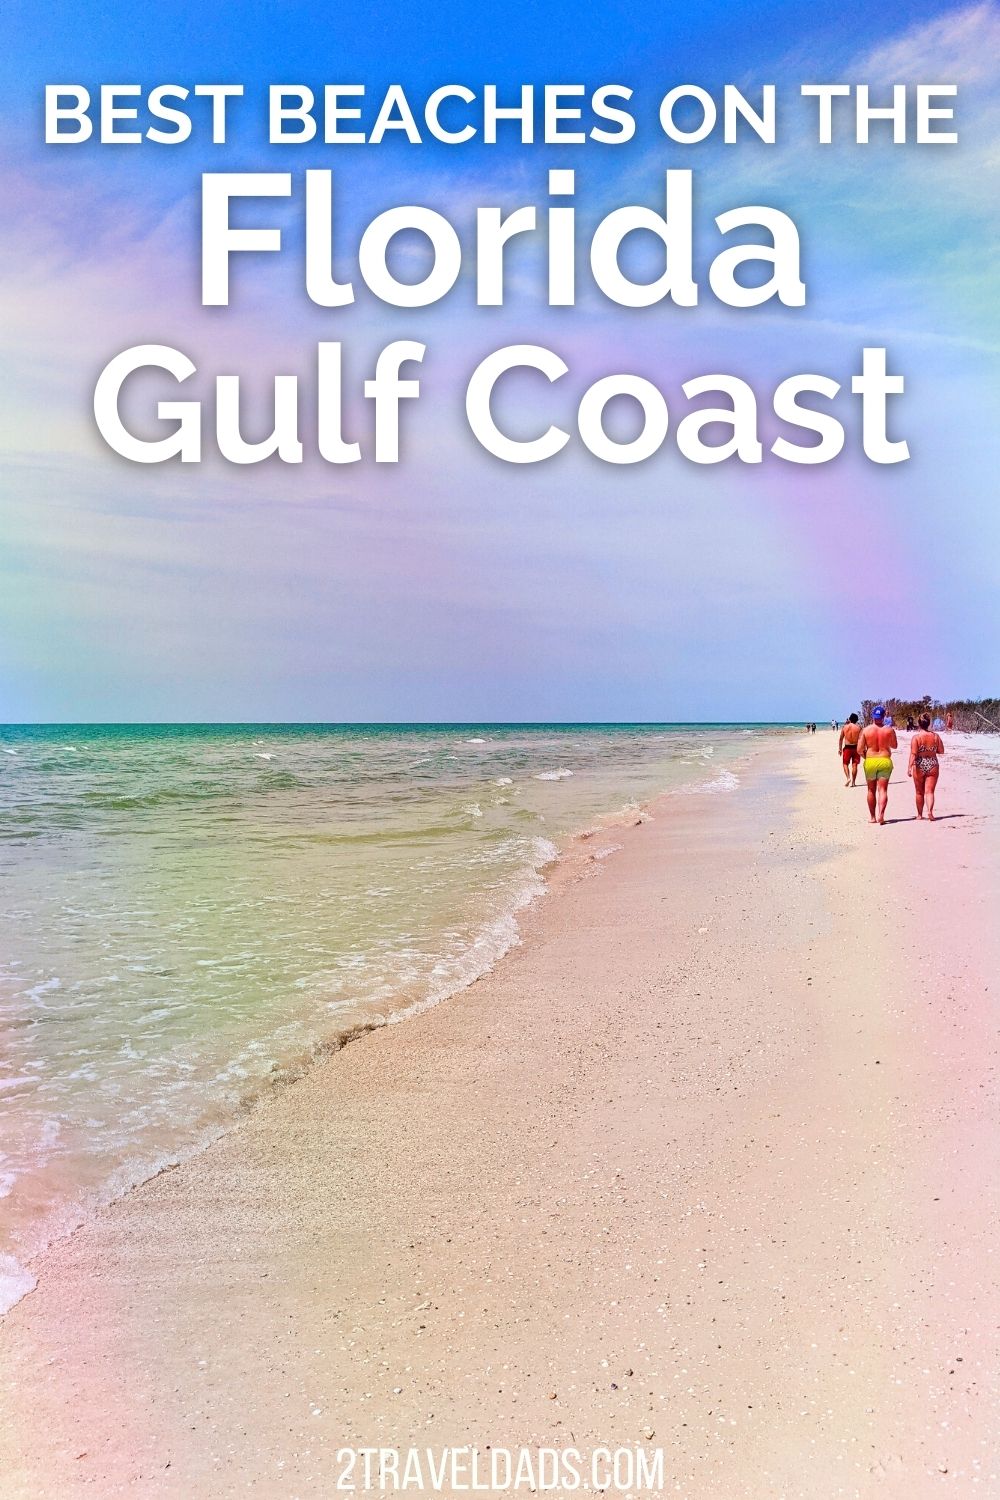 Road trip plan for enjoying the best beaches on the Gulf Coast of Florida, from Naples to Crystal River. Top picks for sugar-fine sand, shark teeth and manatees.